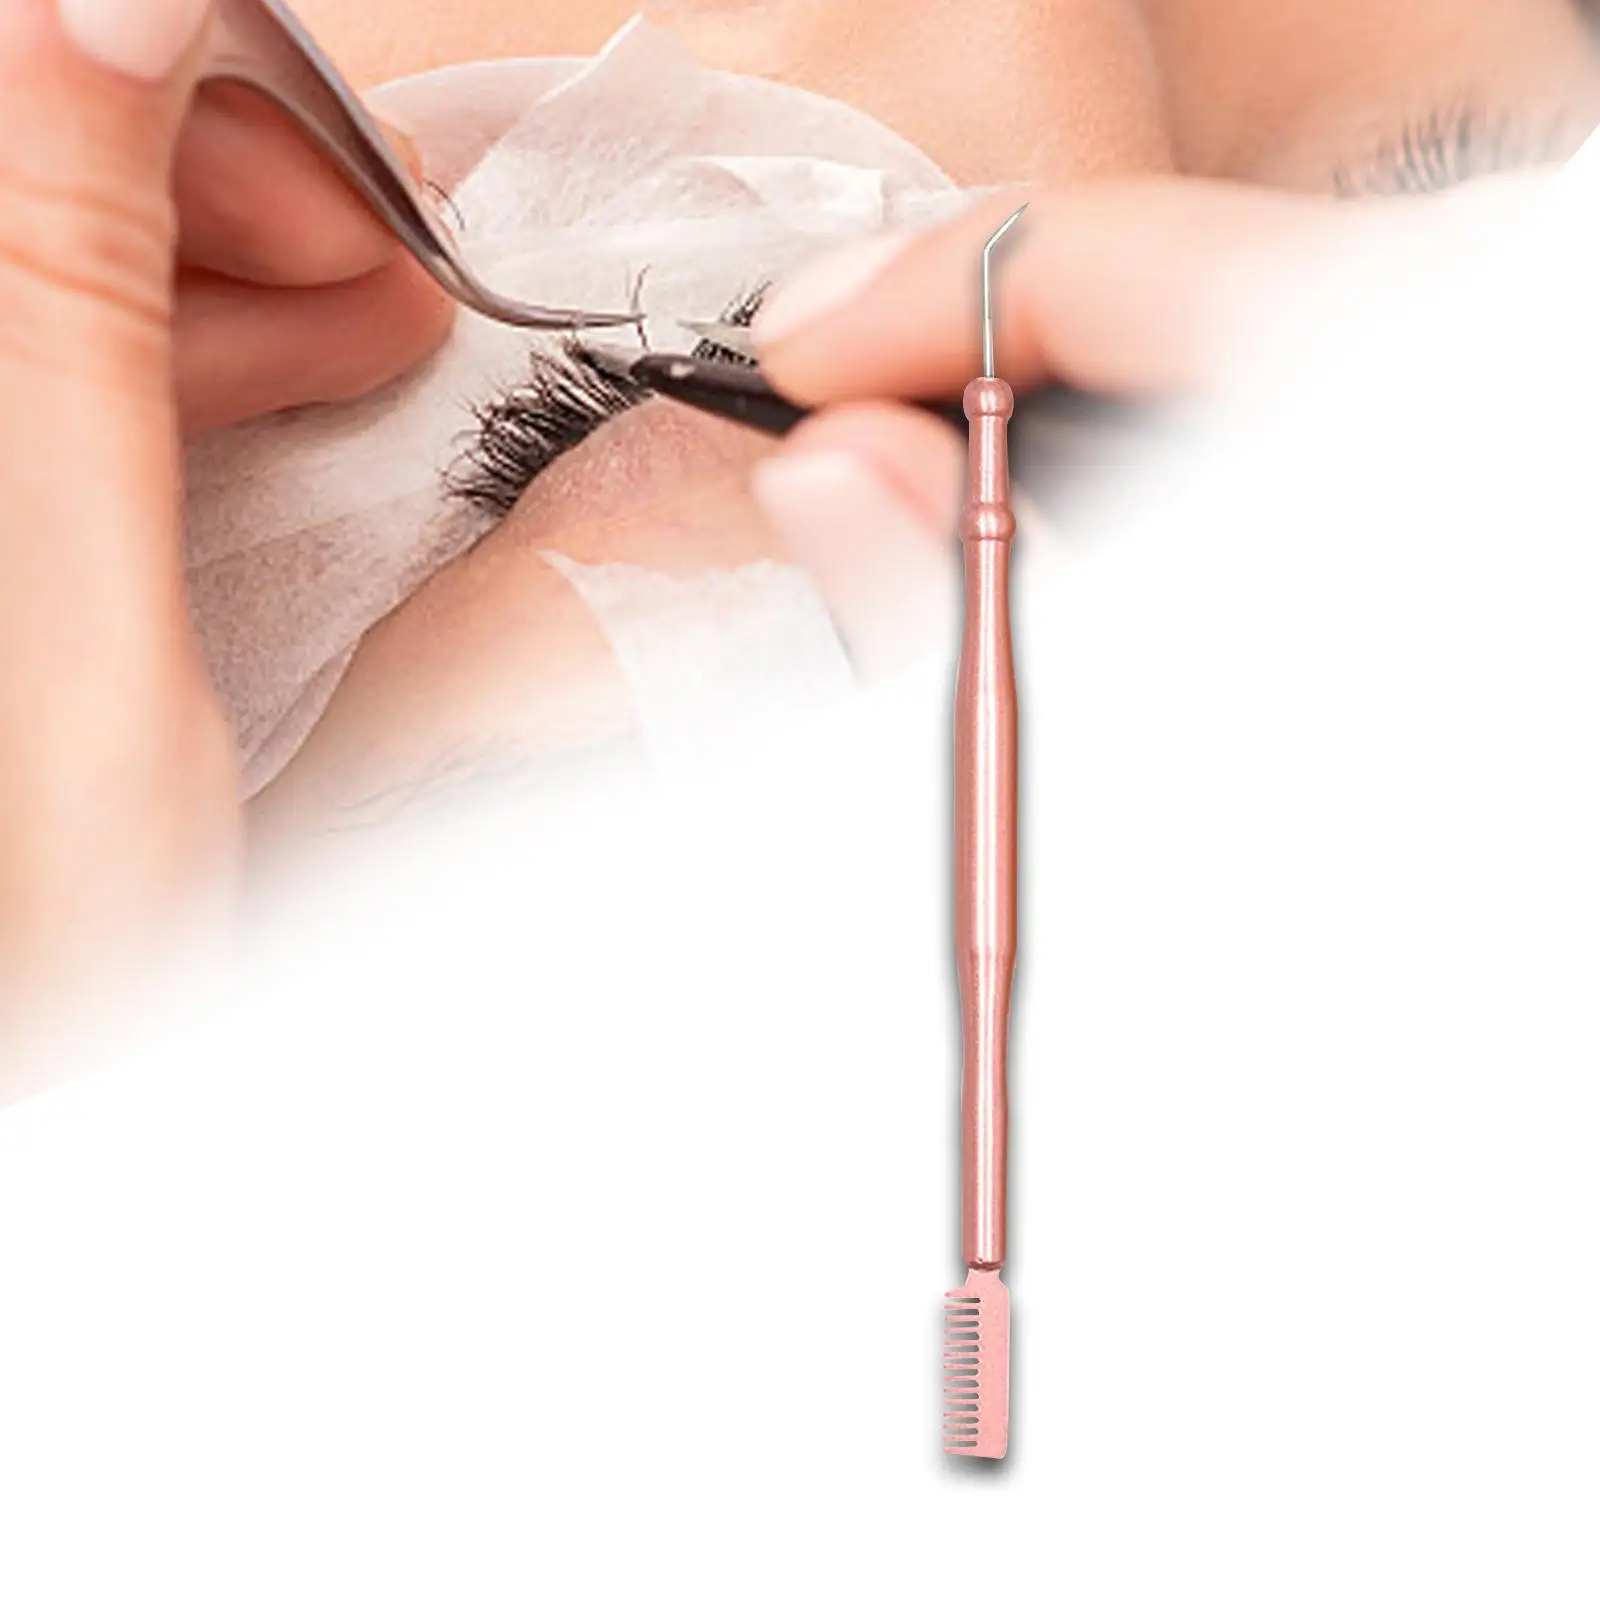 Lash Lift Tool with Separating Comb for Eyelash Eyebrow Perming Tinting Lash Lift Rods Tool with Separation Comb